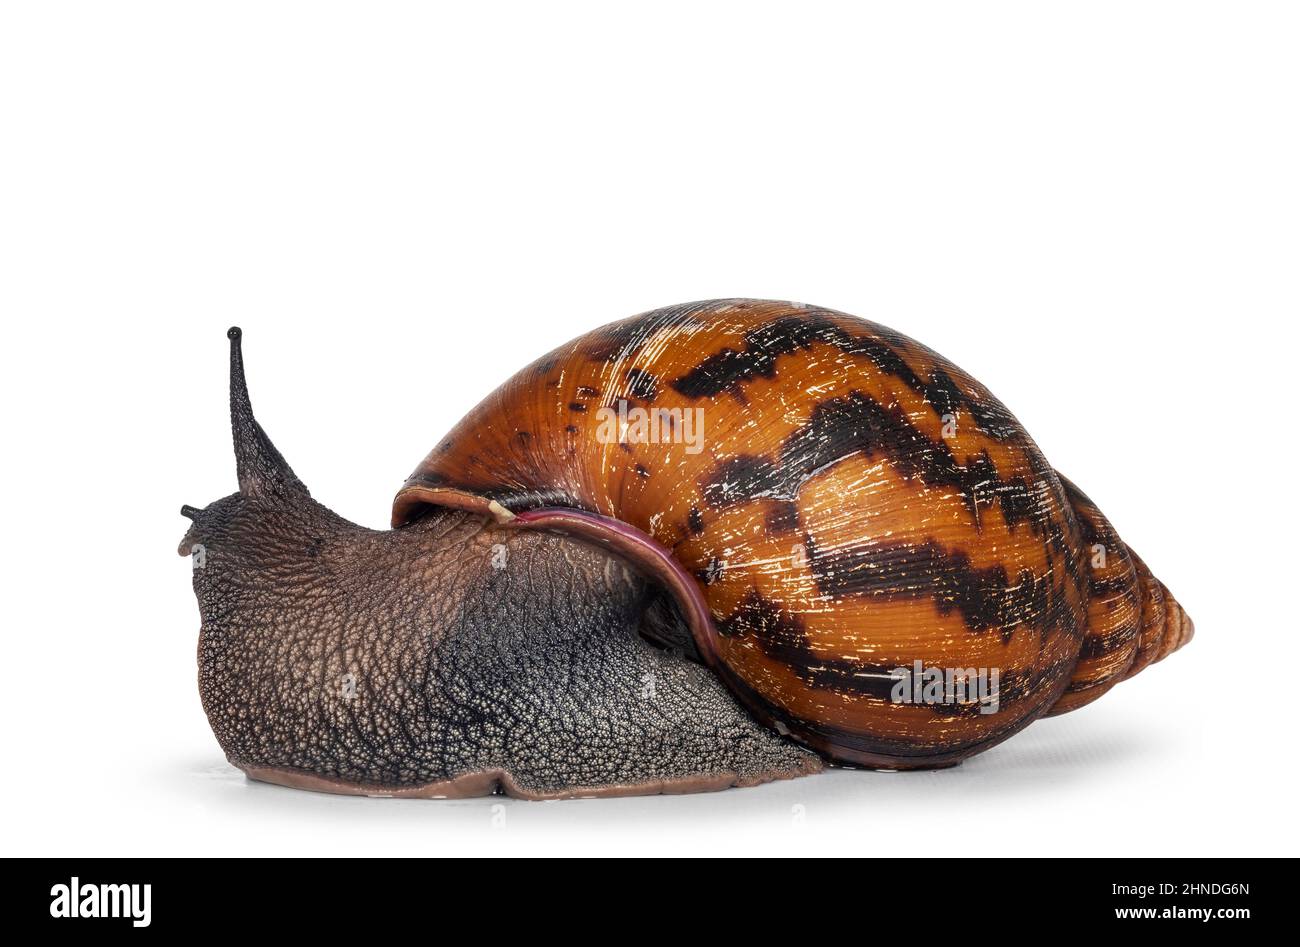 Adult size frican Giant Ghanese snail aka Giant African snail, Giant tiger land snail or Achatina Achatina , moving side ways. isolated on a white bac Stock Photo